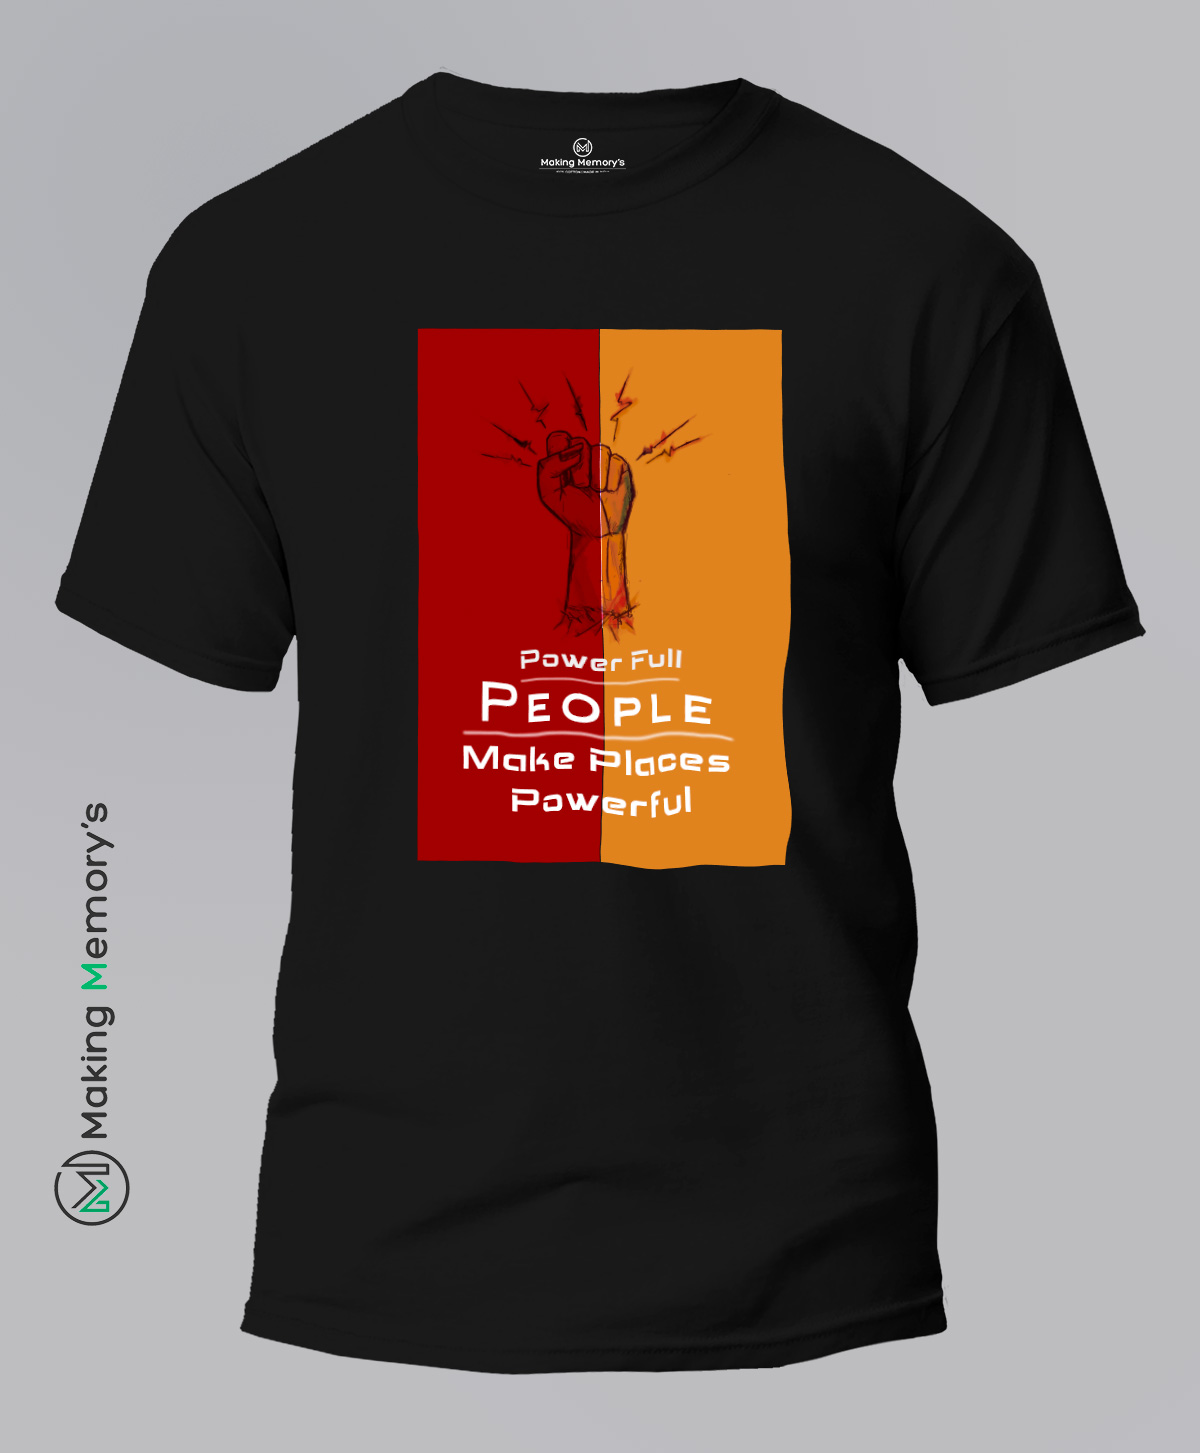 Power-Full-People-Make-Places-Powerful-Black-T-Shirt